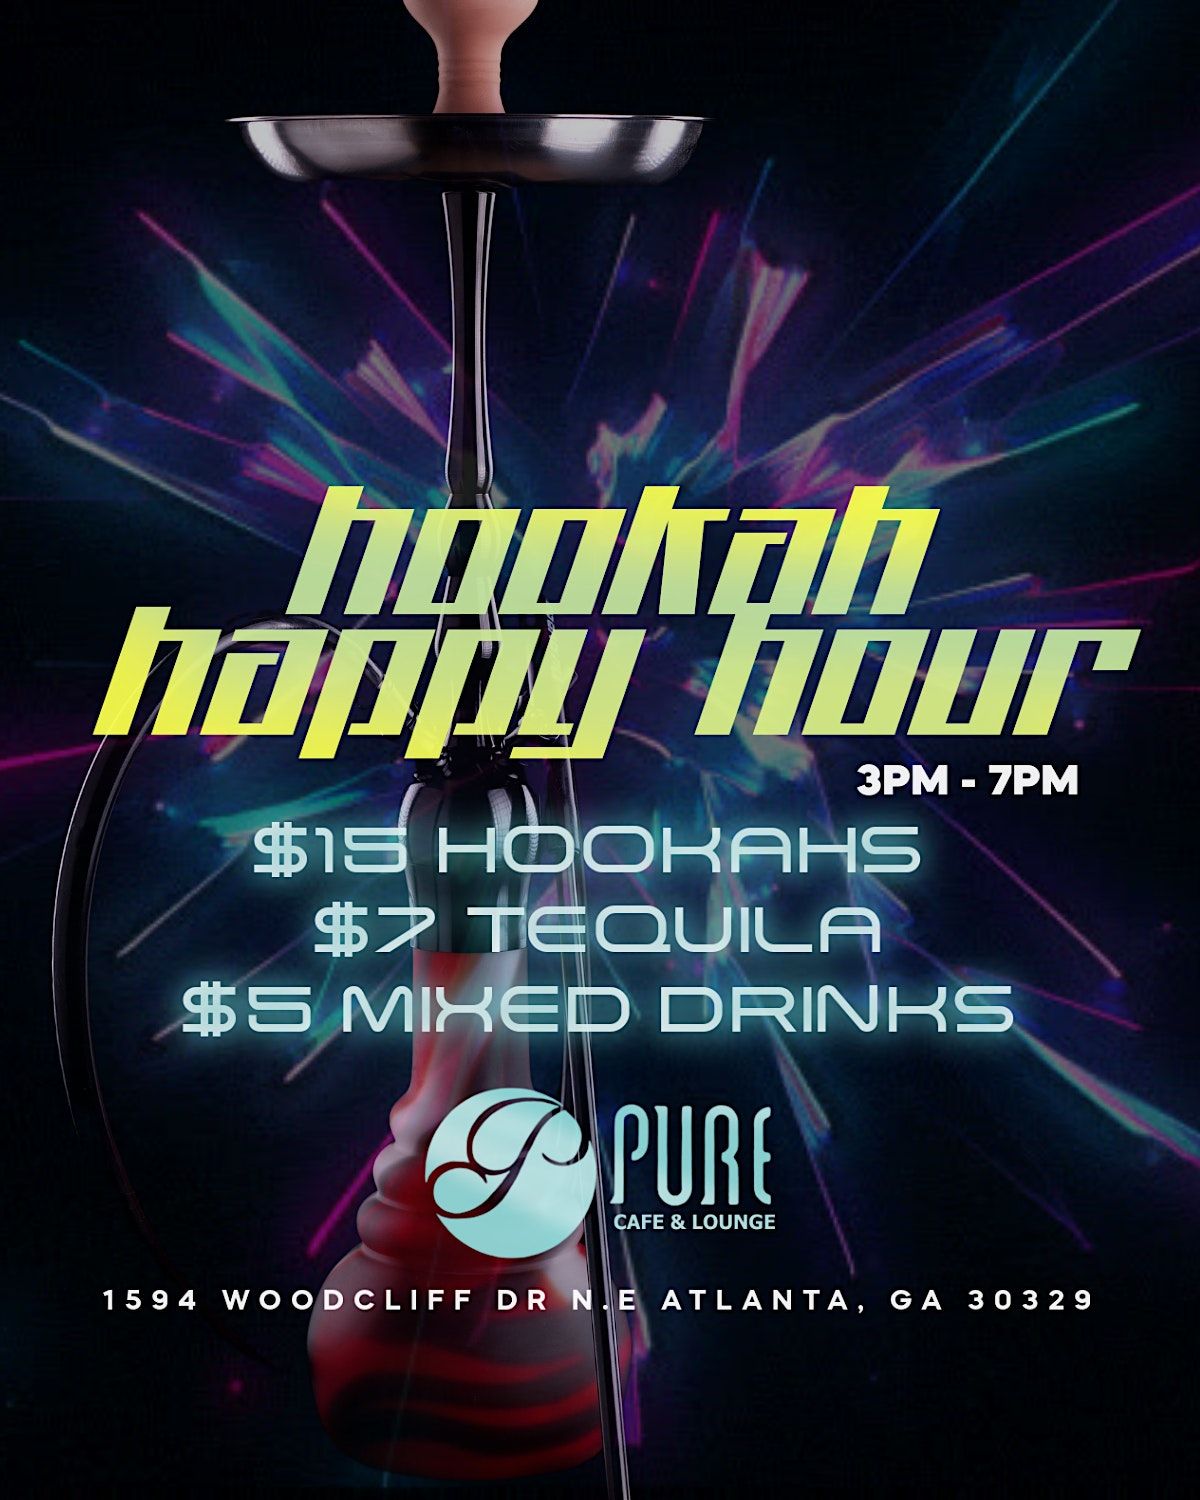 Hookah Happy Hour at Pure Cafe & Lounge